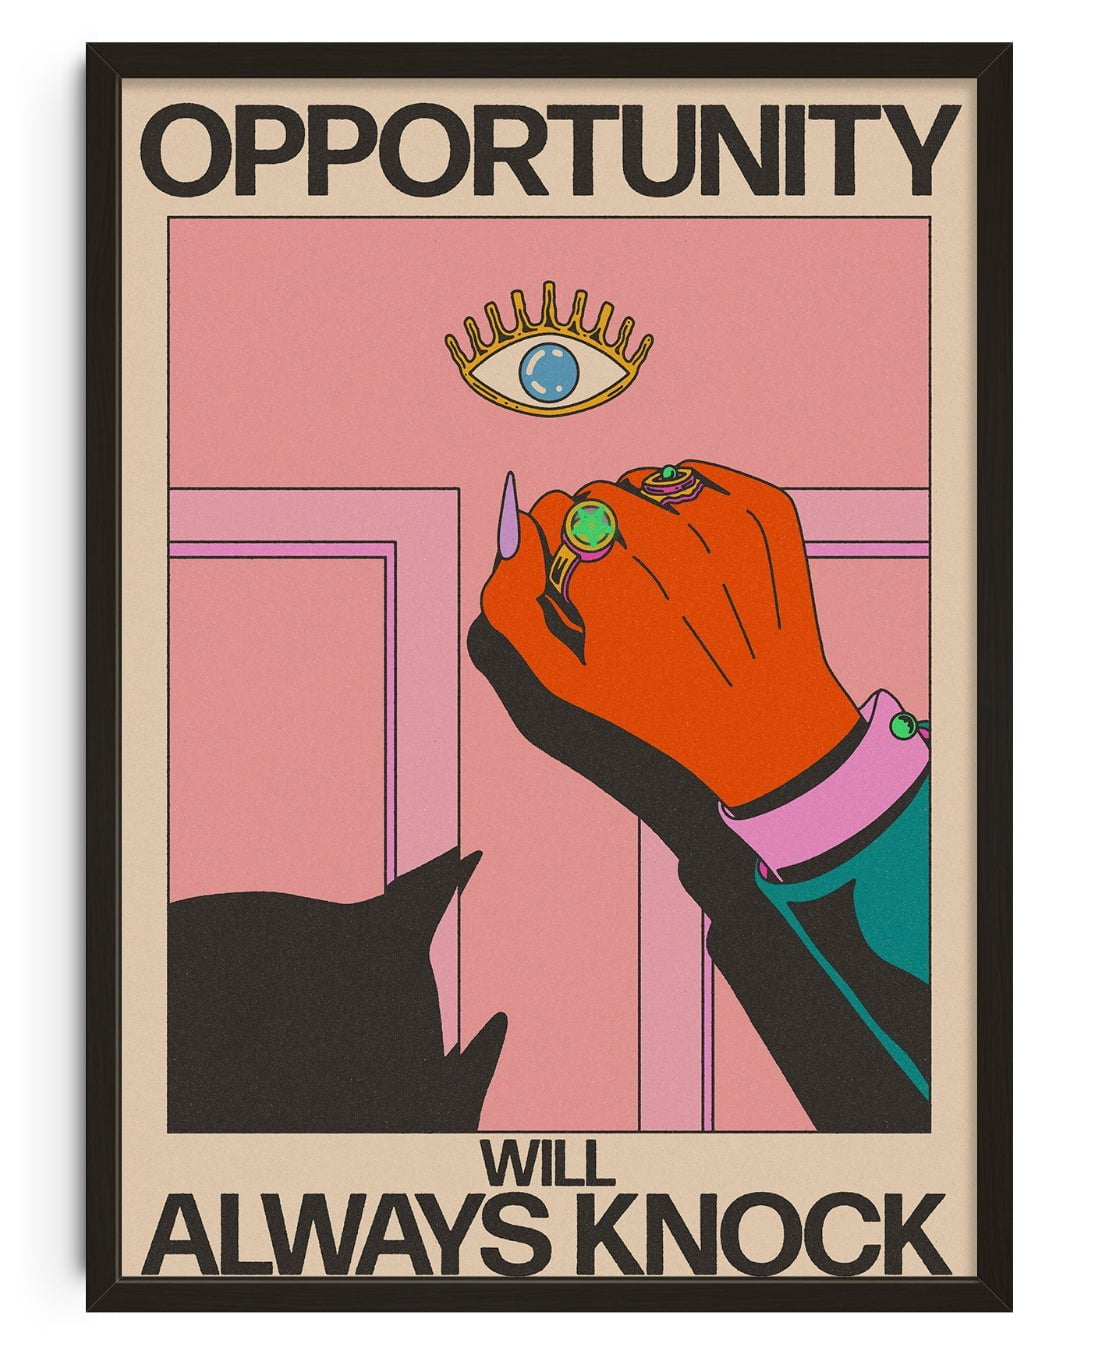 Opportunity Will Always Knock contemporary wall art print by Azaazelus - sold by DROOL